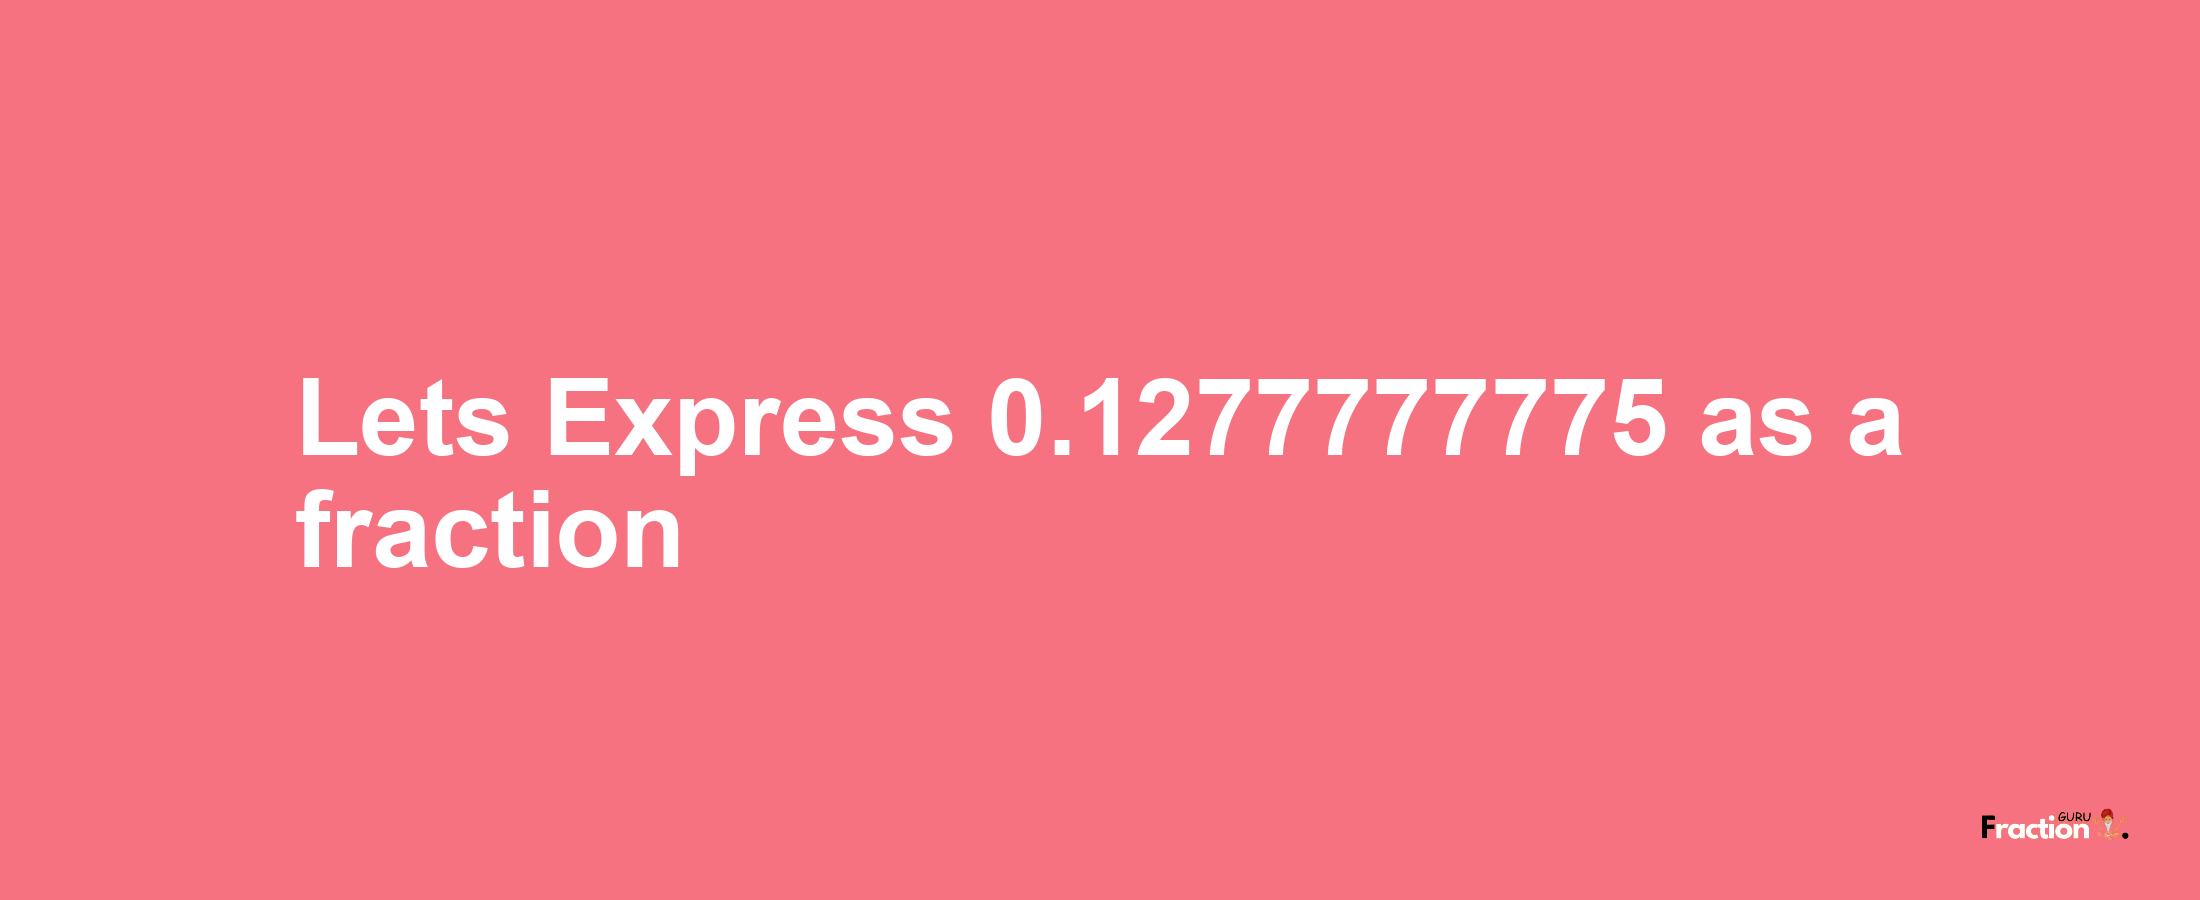 Lets Express 0.1277777775 as afraction